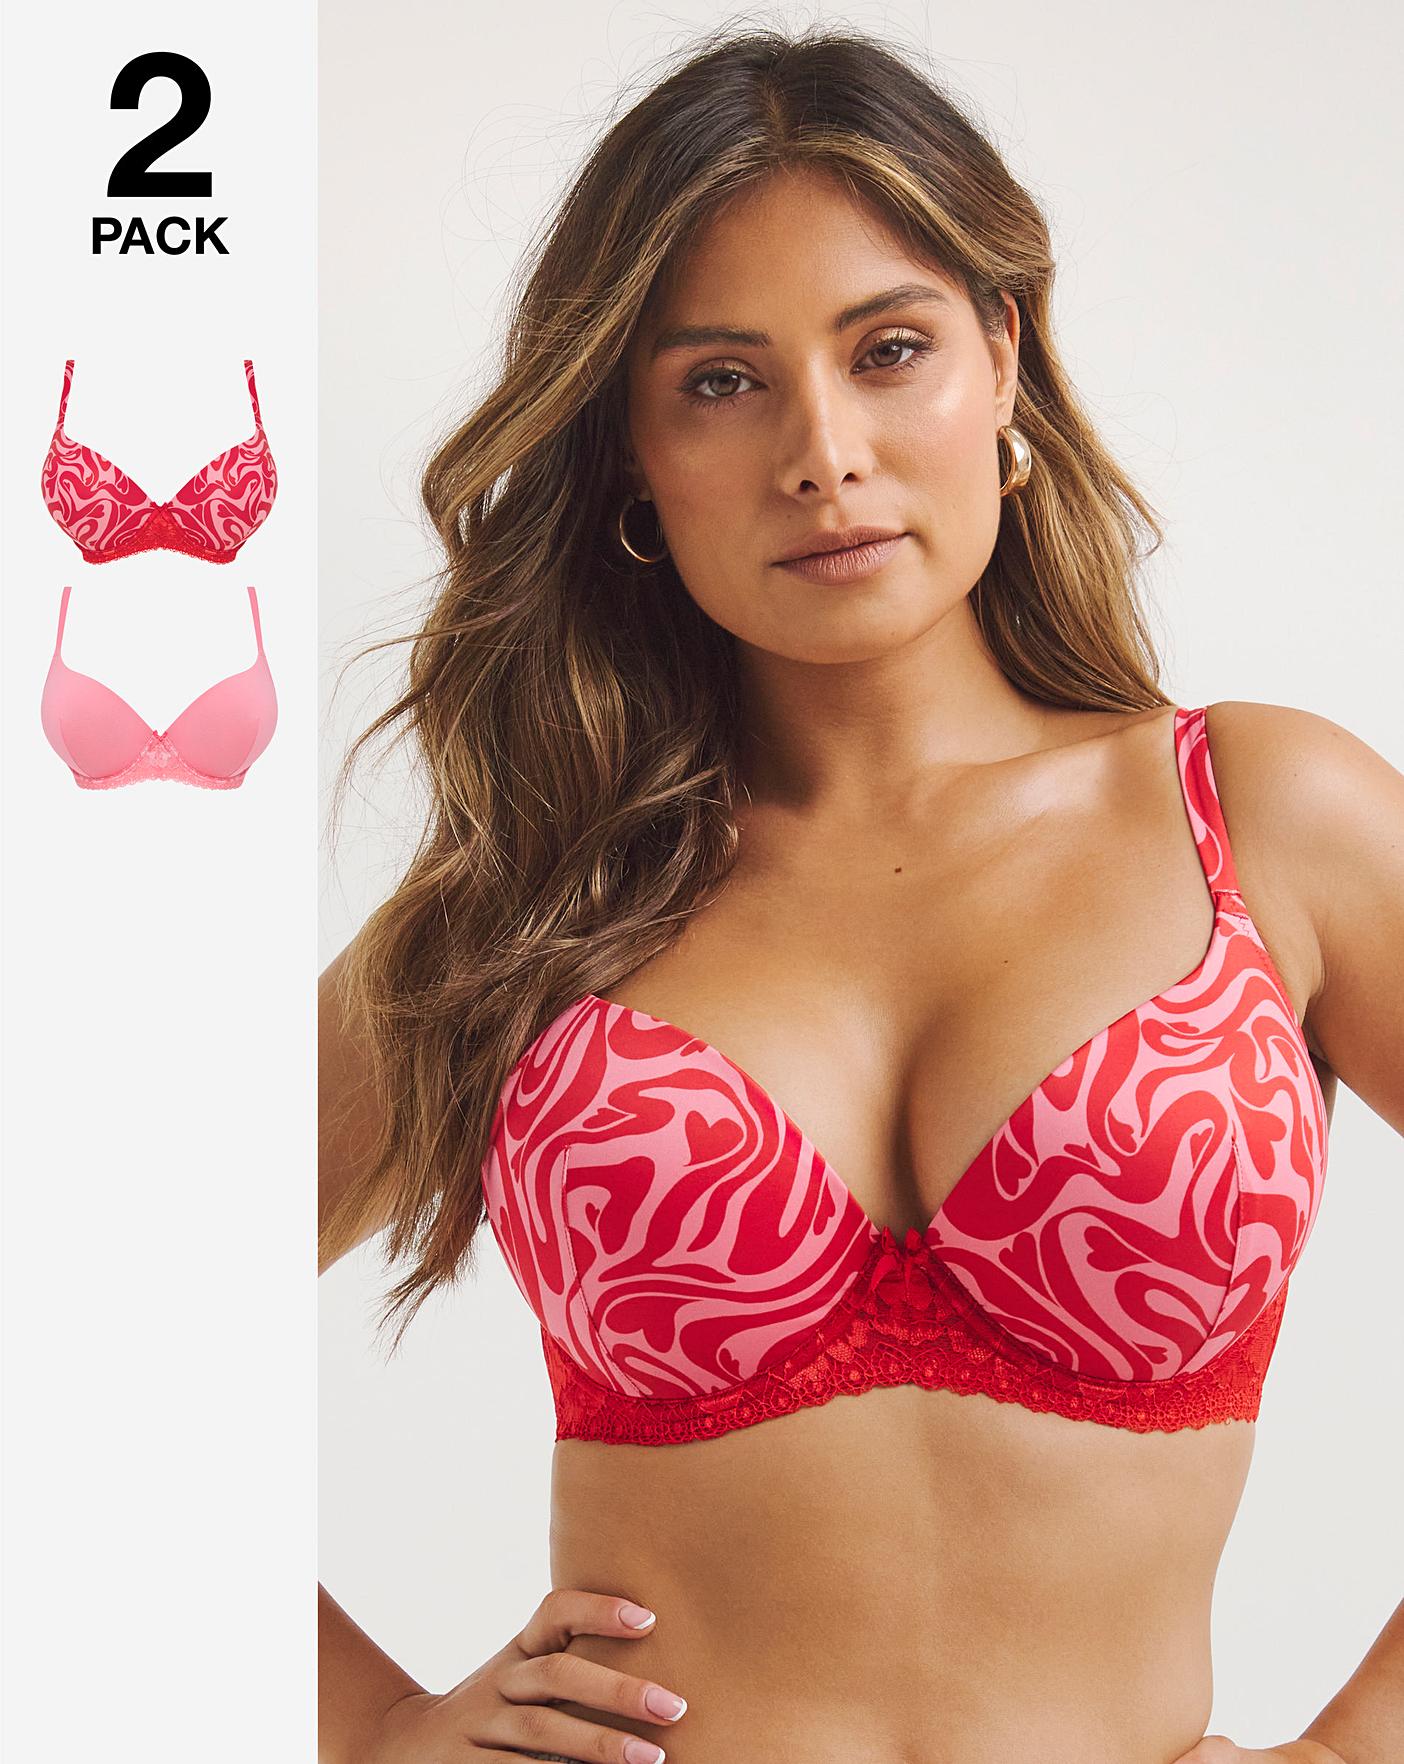 2 Pack Padded Boost Bras Pink Print